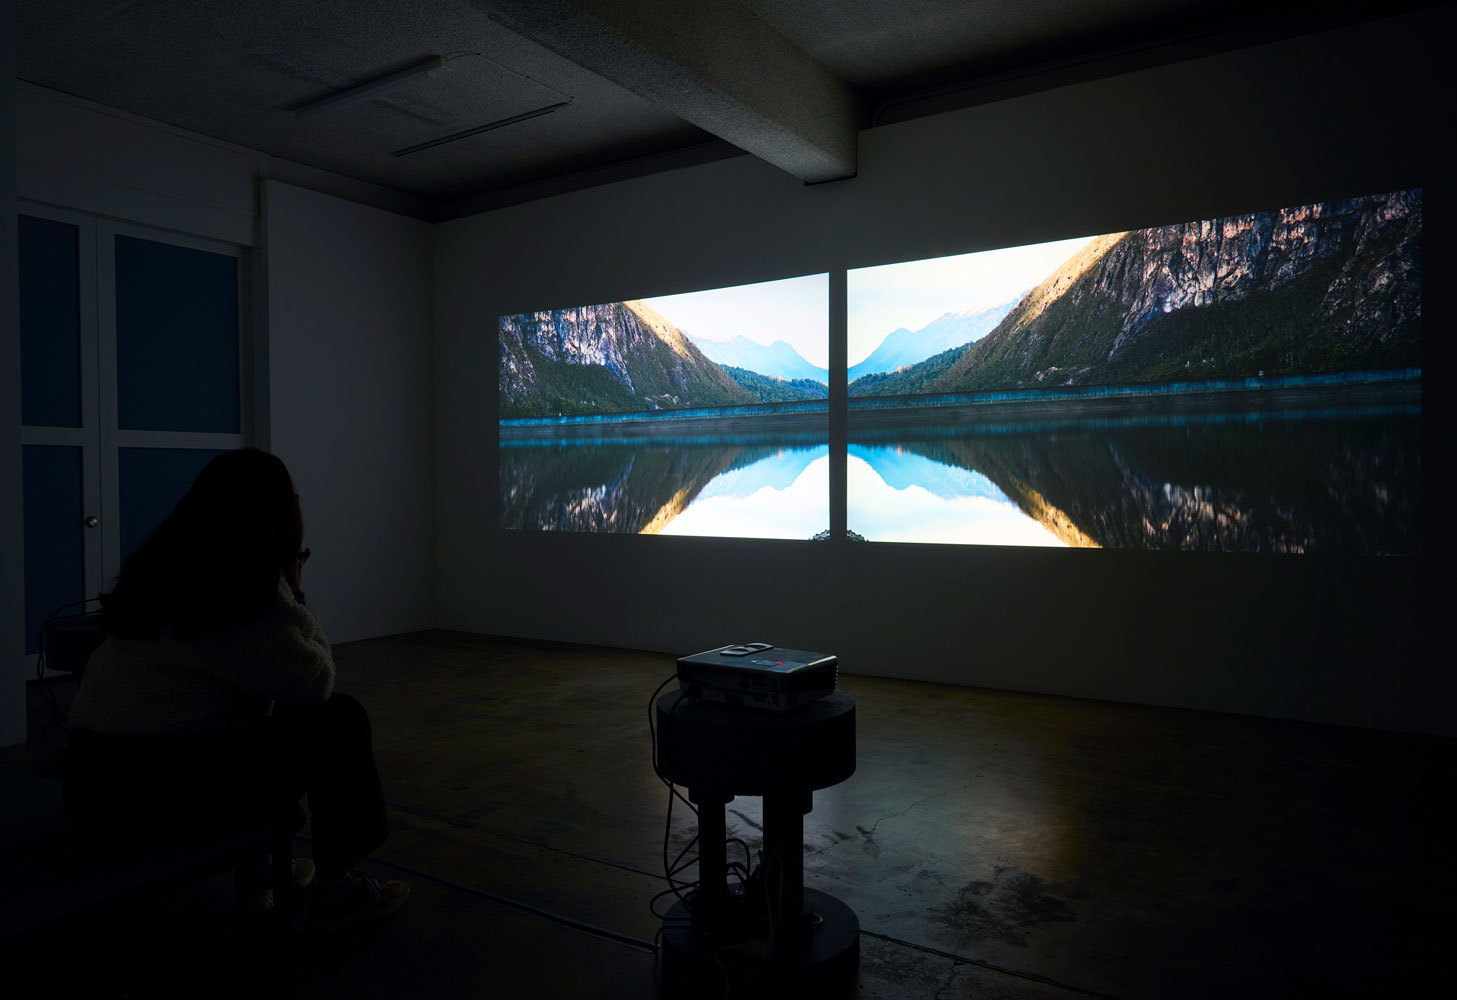 Photograph of two video stills projected onto a wall in a dark room. The images are mirrored and show a body of water with mountains reflected onto it in an almost butterfly shape